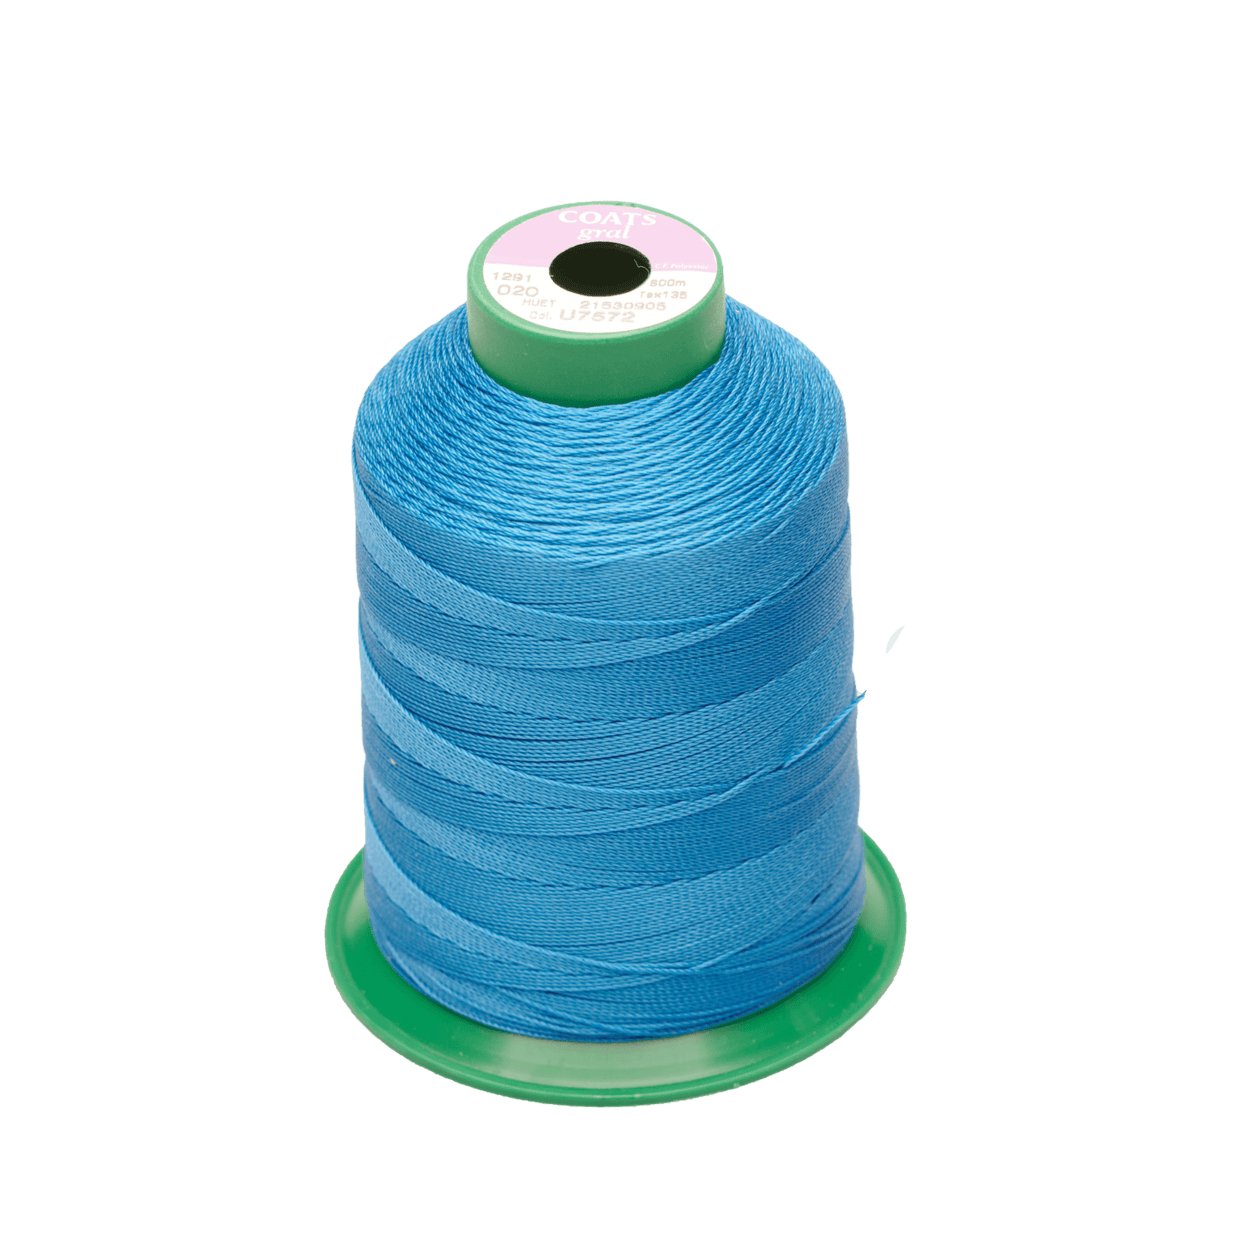 Duotone Thread poly Gral 20 600m (SS20-SS22) 2022 - Worthing Watersports - 9008415864775 - Spareparts - Duotone Kiteboarding